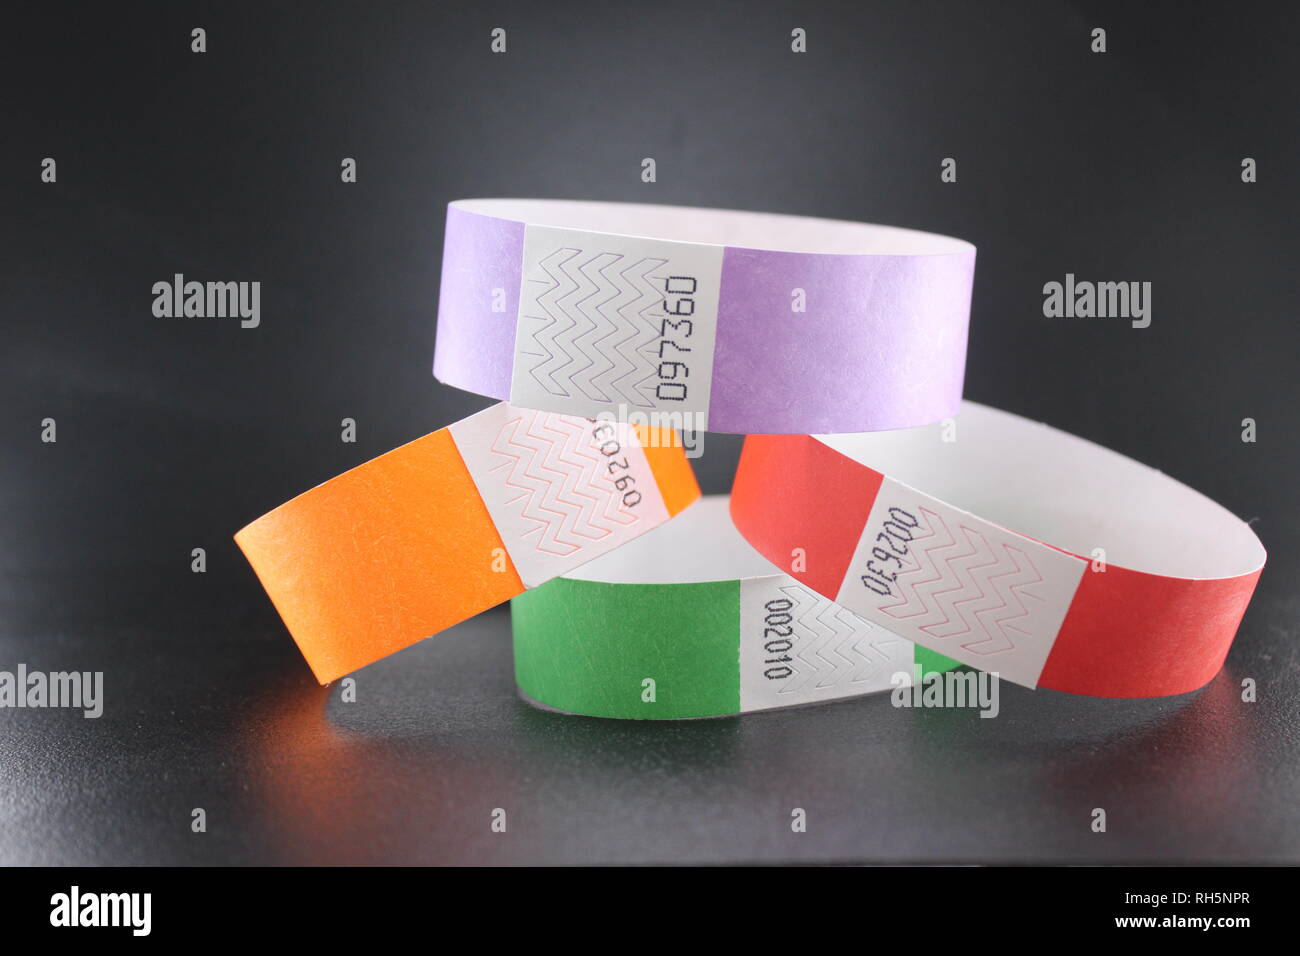 Colorful Tyvek wristbands for concerts, events and music festivals Stock Photo